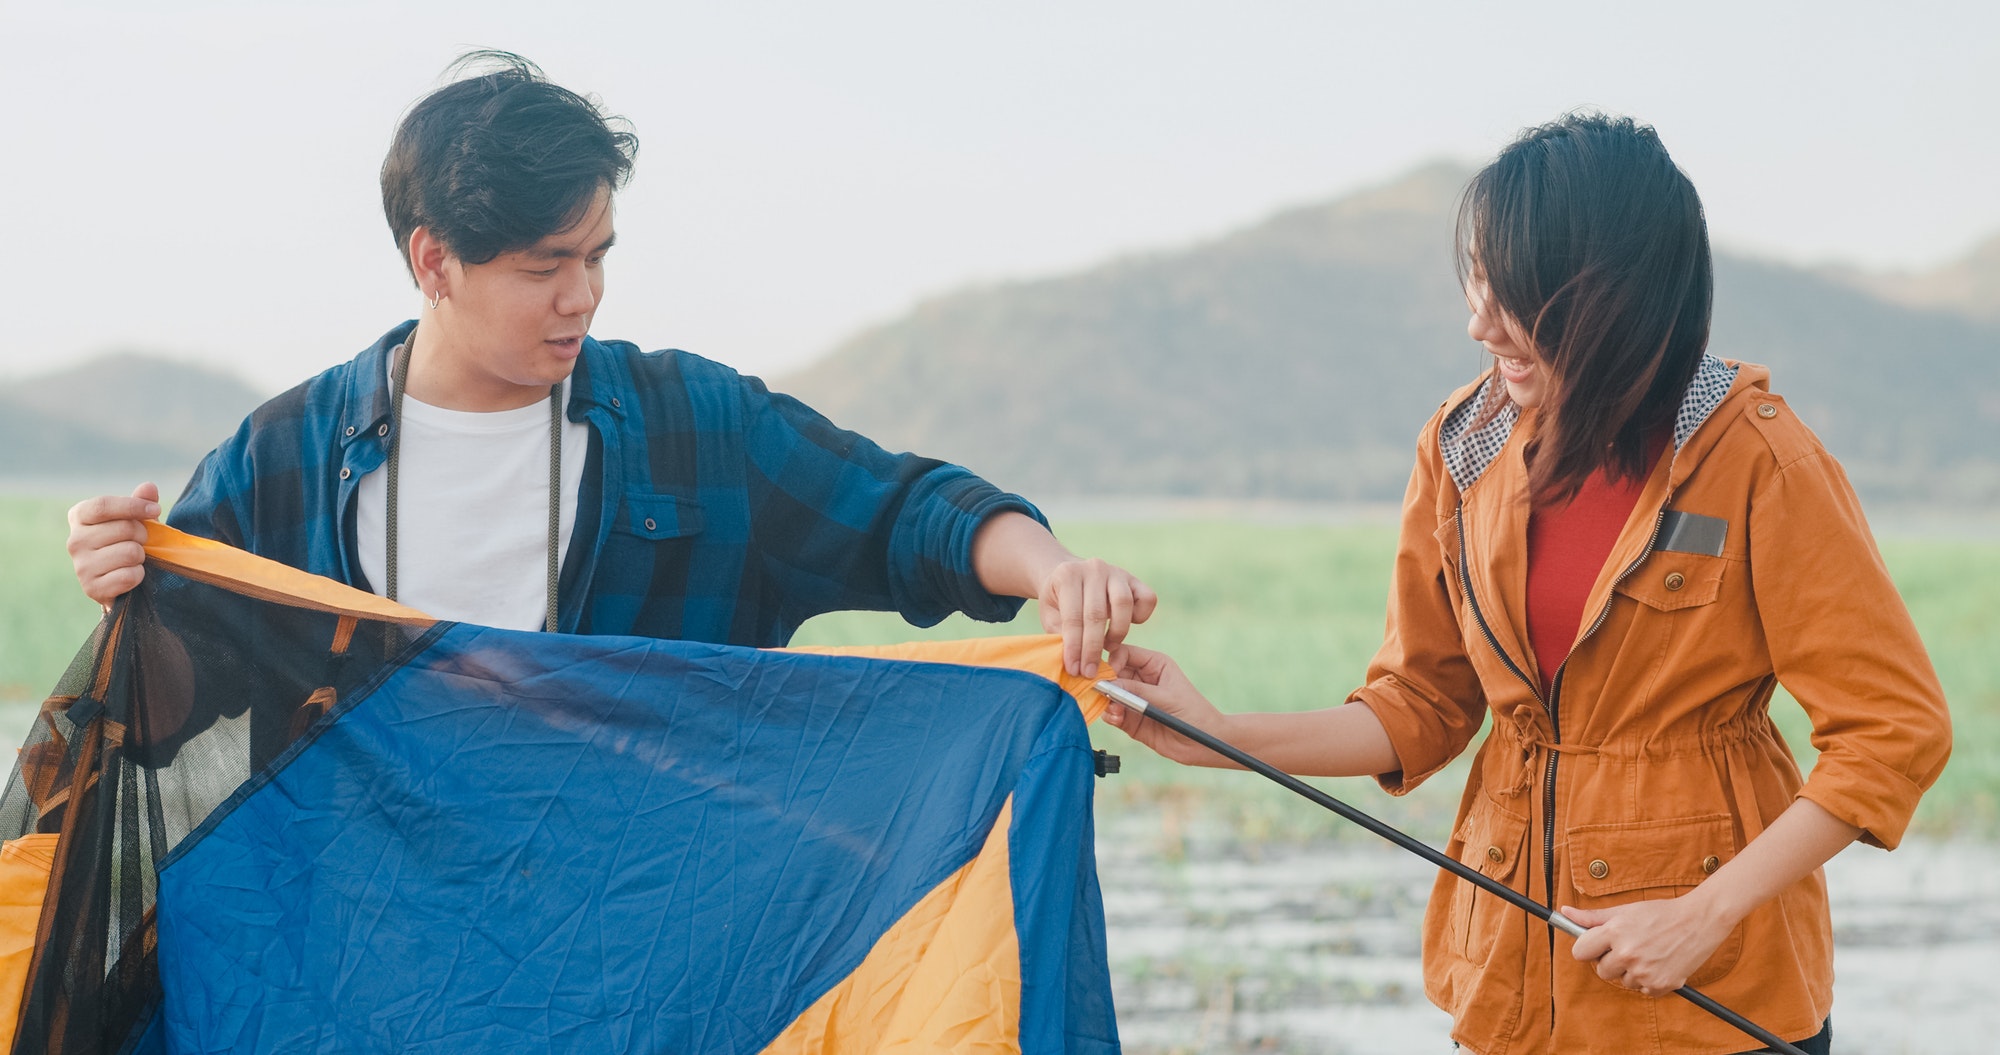 Young asia campers couple setting up the tent camping gear outdoor near seaside.